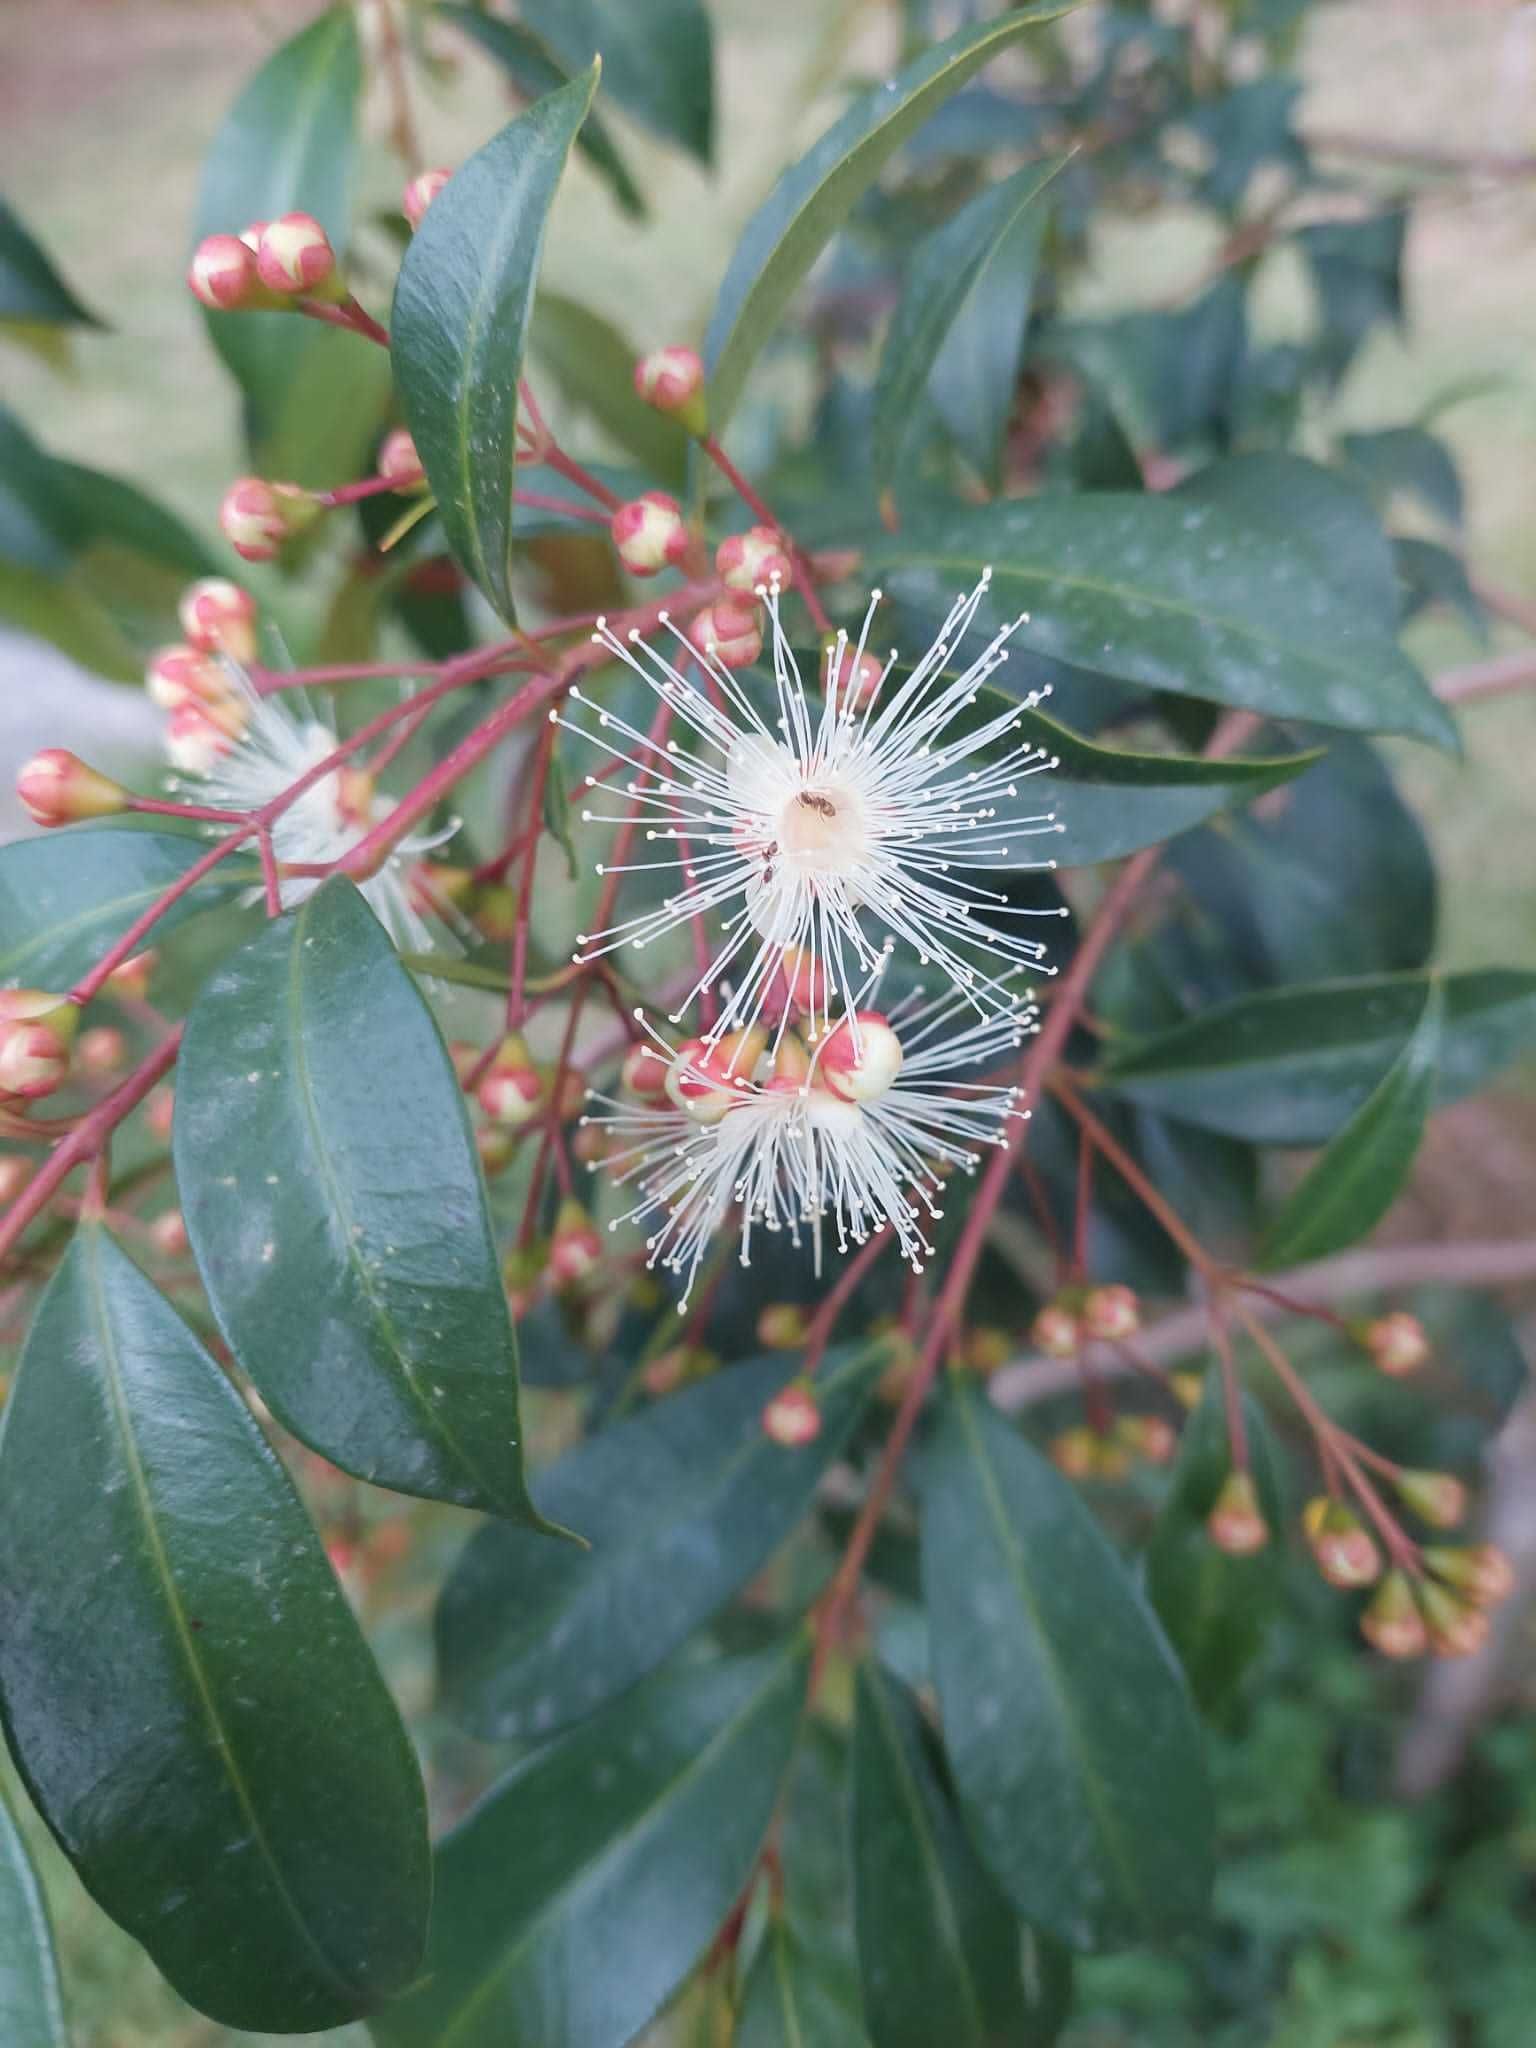 Lilly Pilly - Syzygium australe